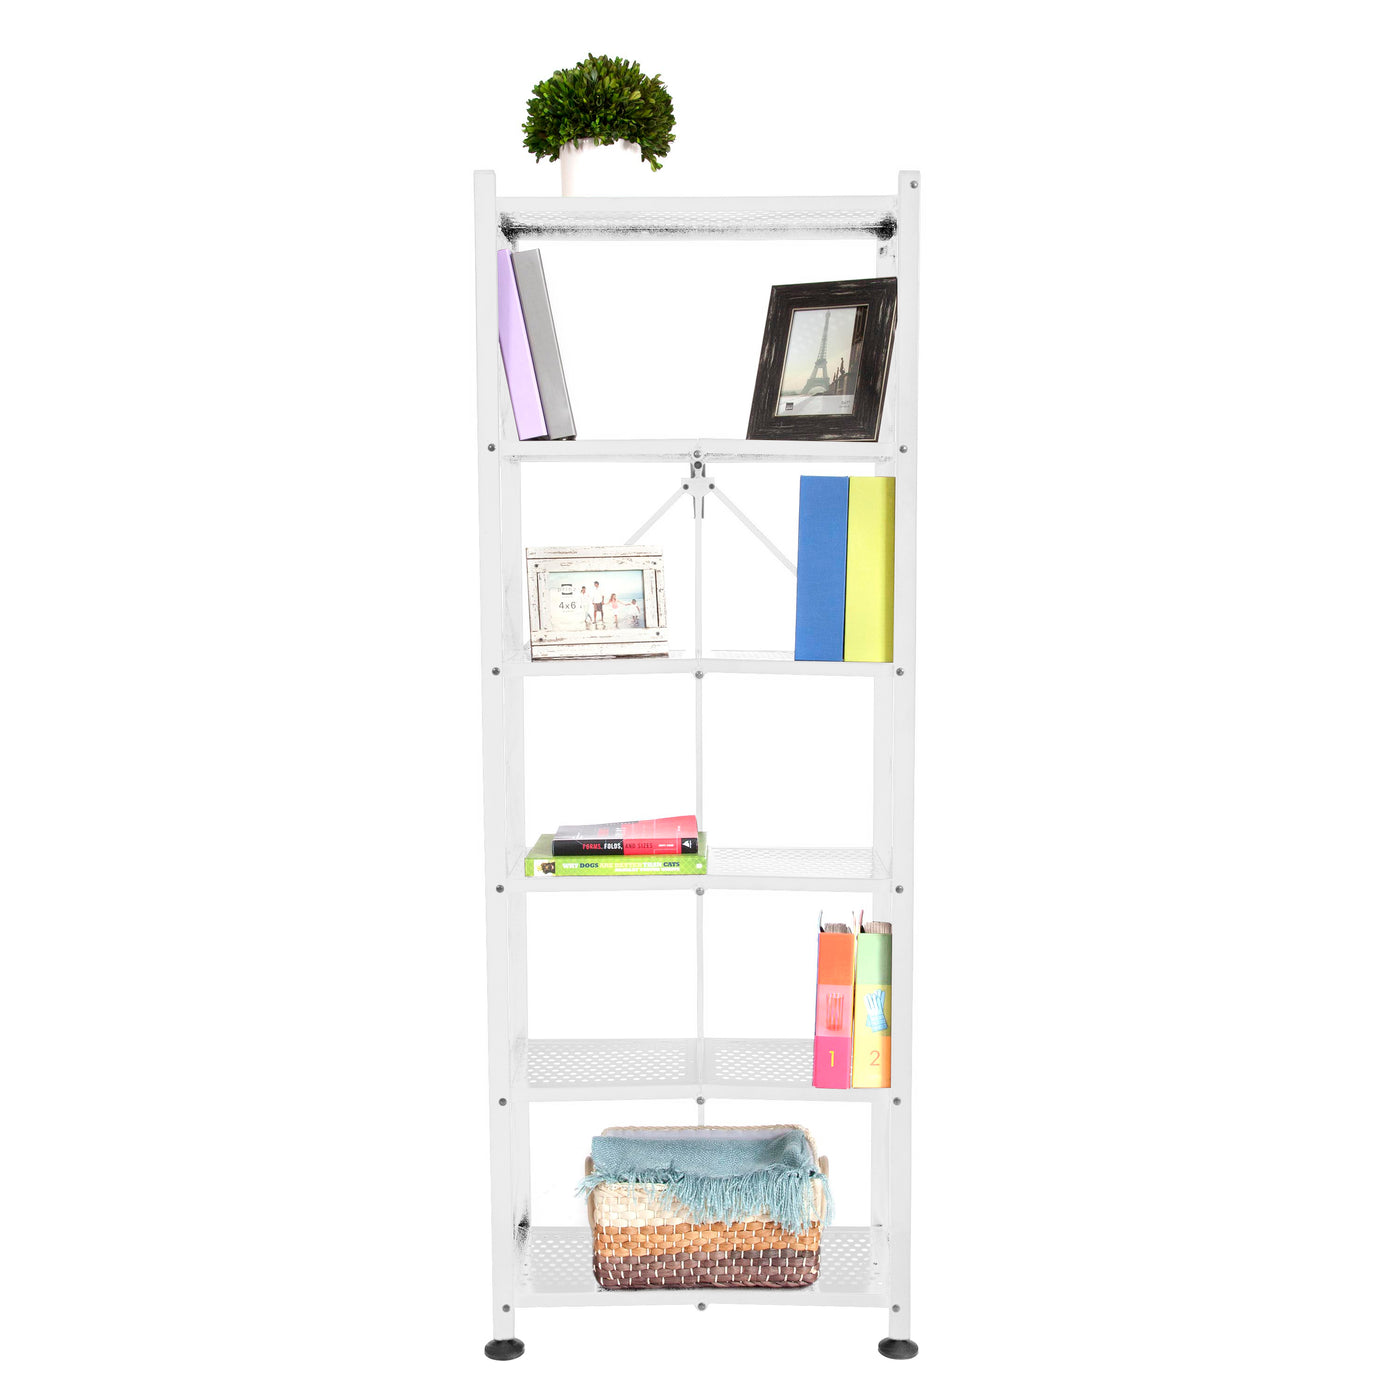 Origami RB Series: Foldout 6-Shelf Modern Perforated Bookcase